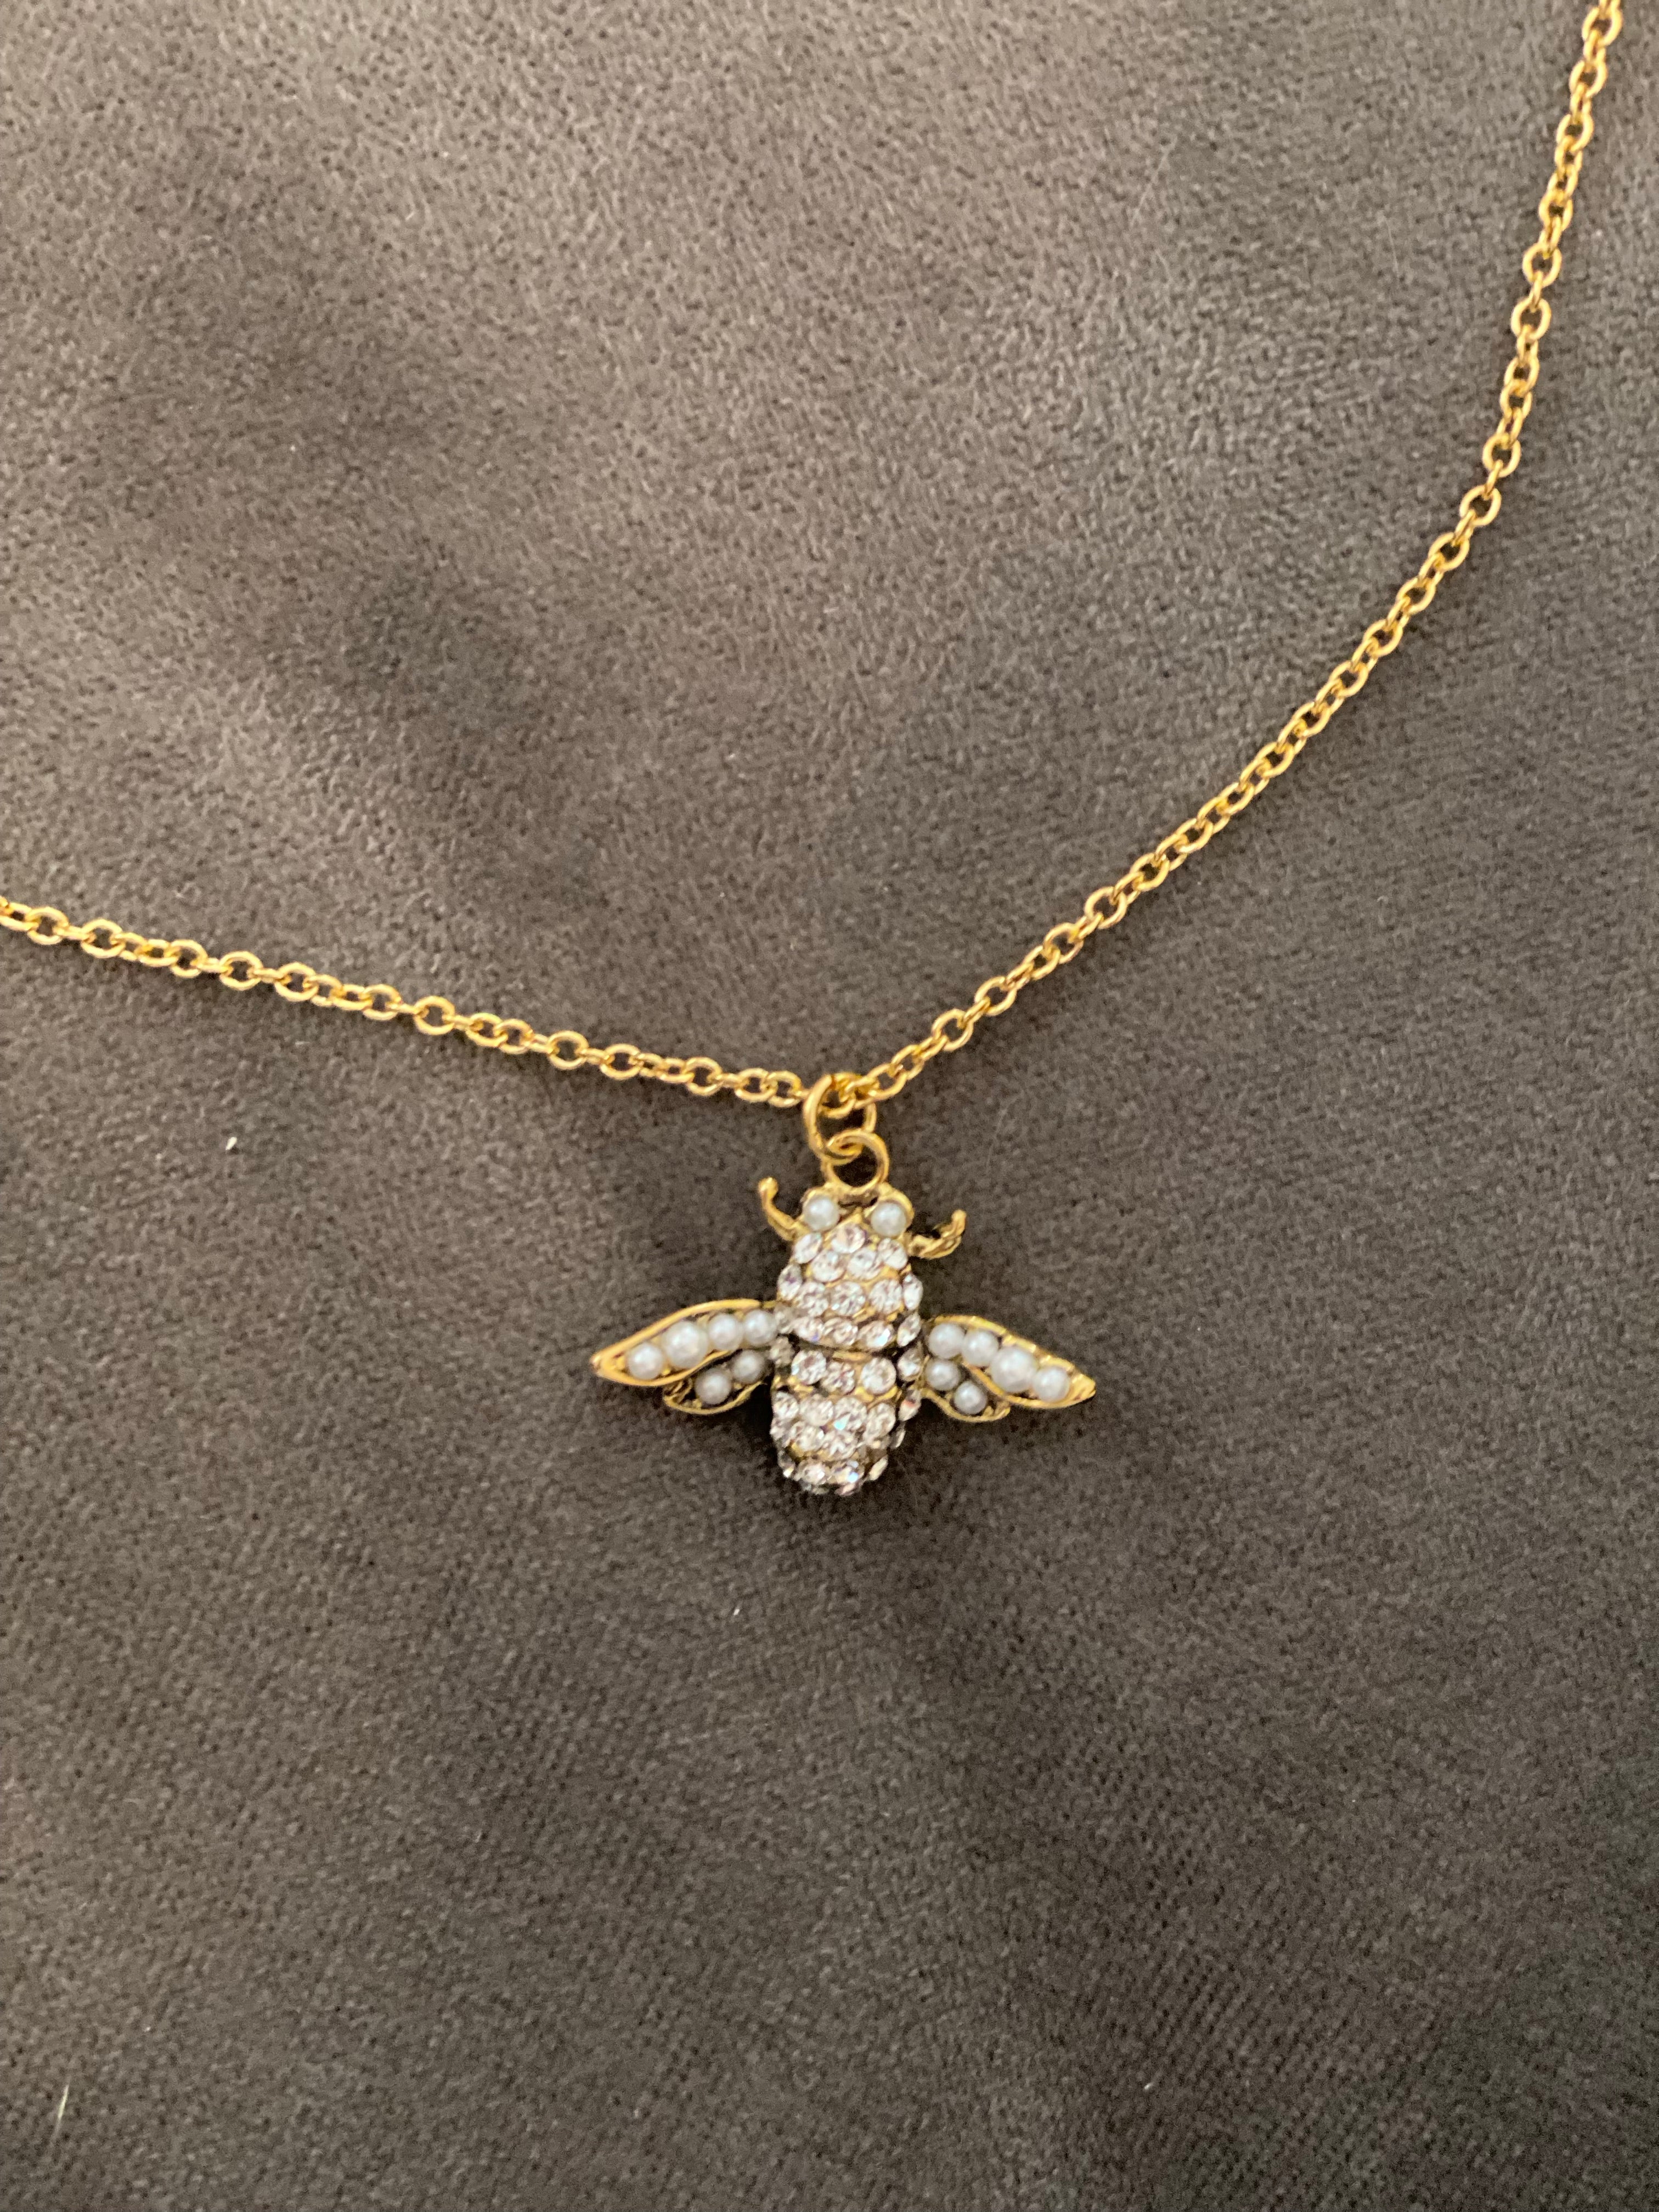 LARGE BUMBLE BEE NECKLACE IN SILVER AND AMBER - Aleks Jewellers